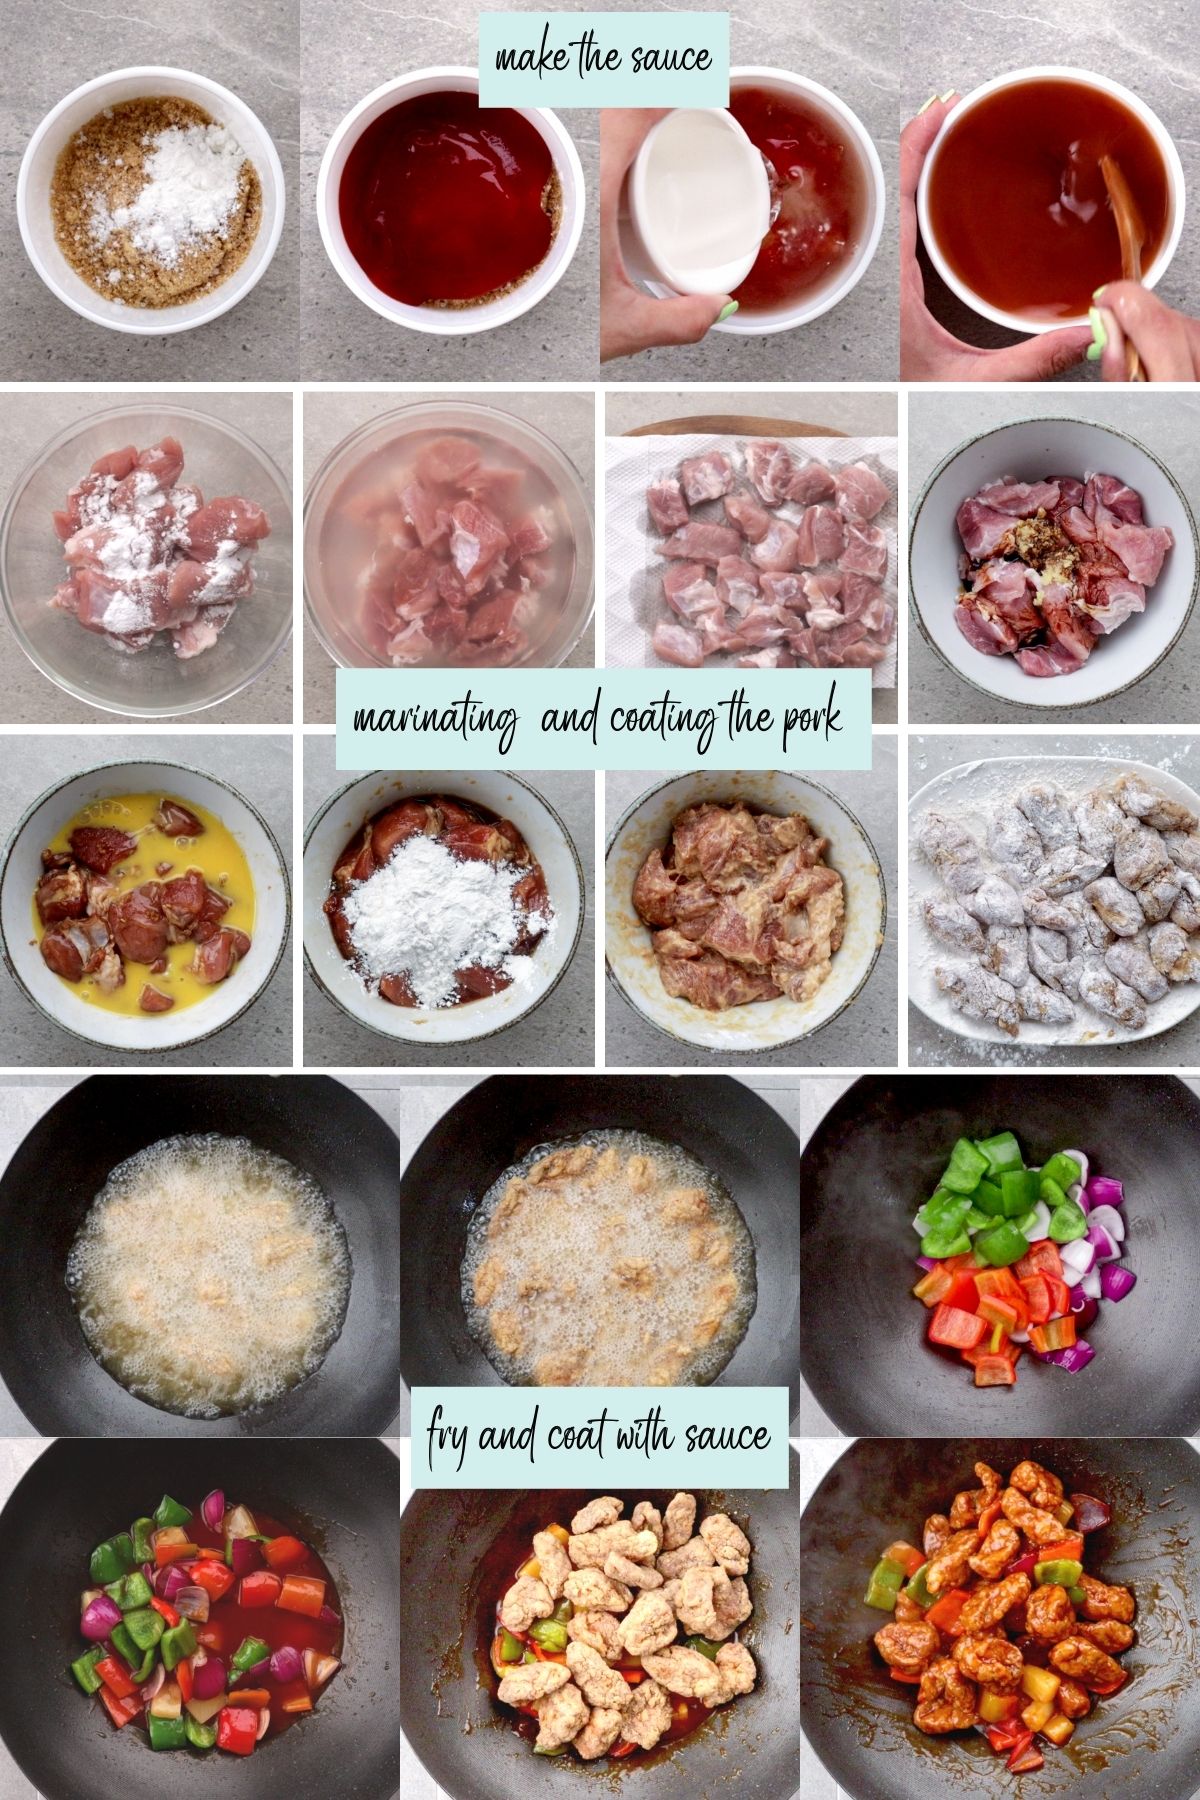 Steps on how to cook sweet and sour pork.